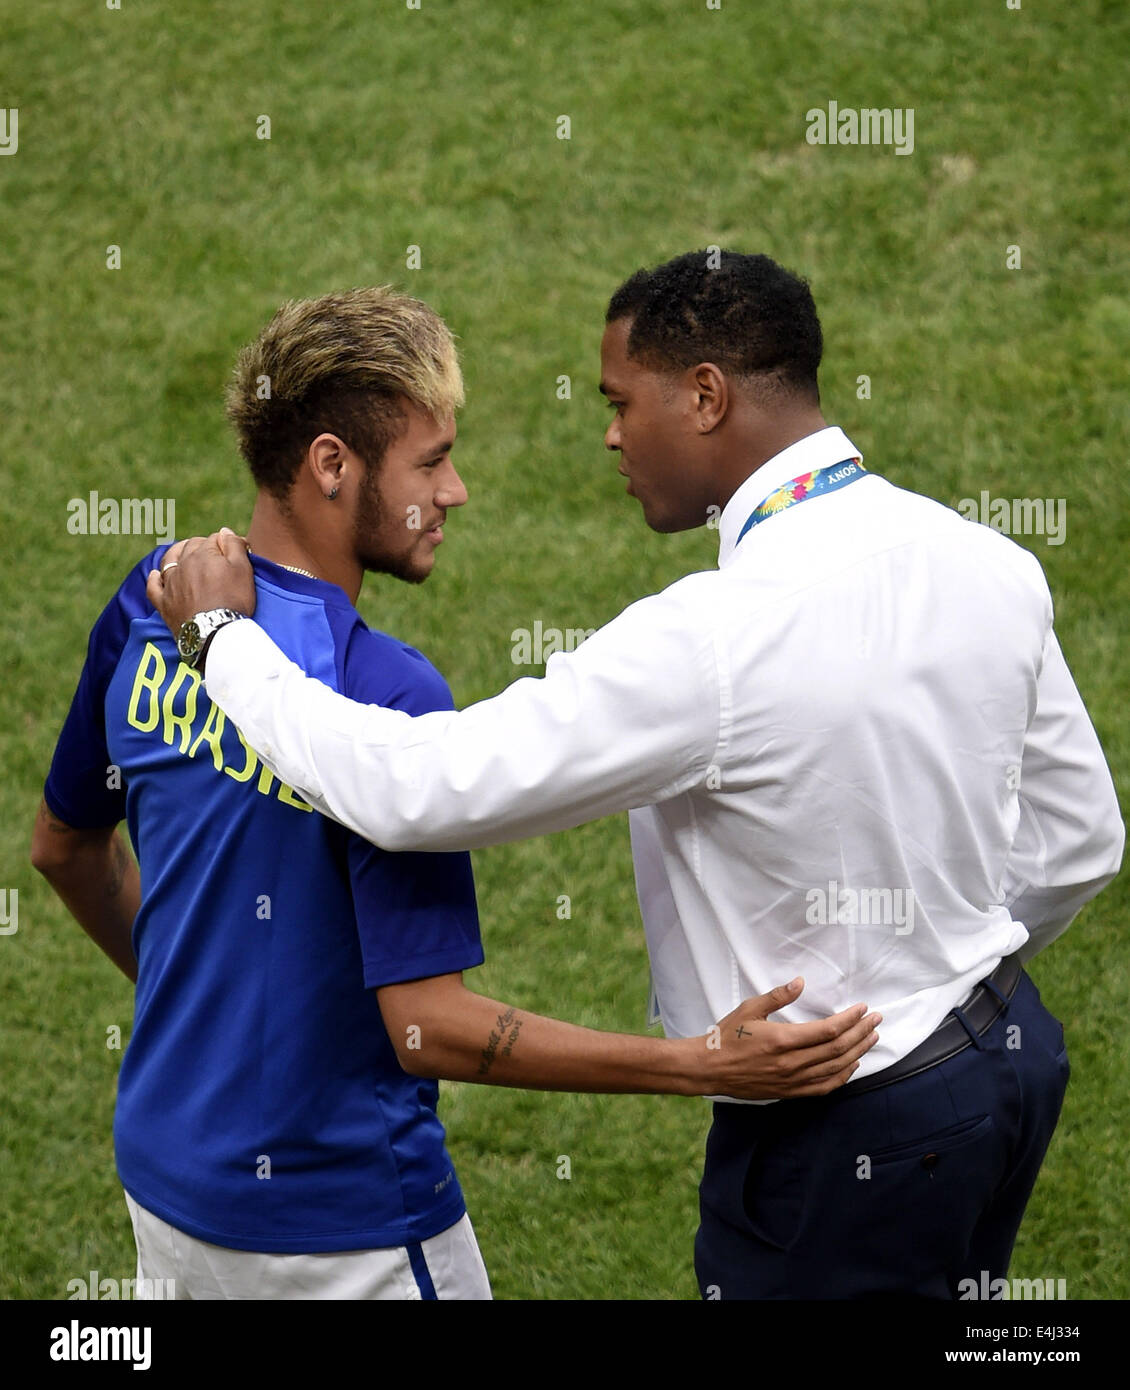 Brasilia, Brazil. 12th July, 2014. Brazil's Neymar (L) talks with Netherlands' assistant coach Patrick Kluivert before the third place play-off match between Brazil and Netherlands of 2014 FIFA World Cup at the Estadio Nacional Stadium in Brasilia, Brazil, on July 12, 2014. Credit:  Lui Siu Wai/Xinhua/Alamy Live News Stock Photo